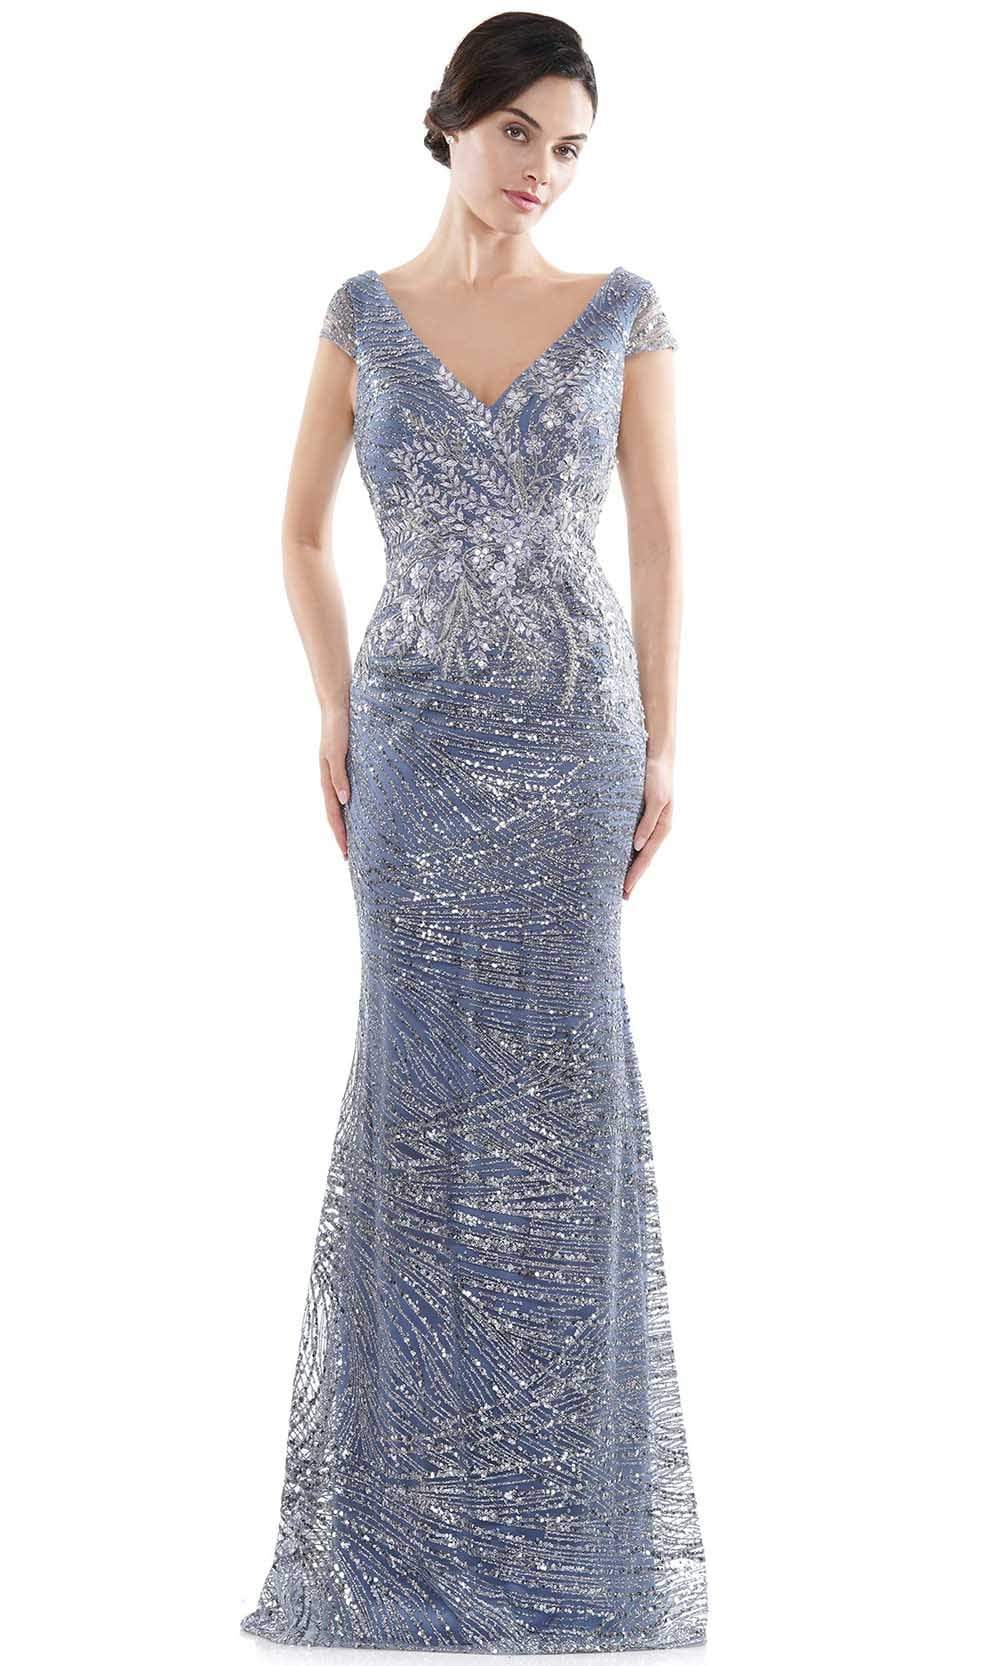 Rina Di Montella - RD2723 V-Neck 3D Floral Appliqued Glitter Gown Mother of the Bride Dresses 4 / Wedgewood